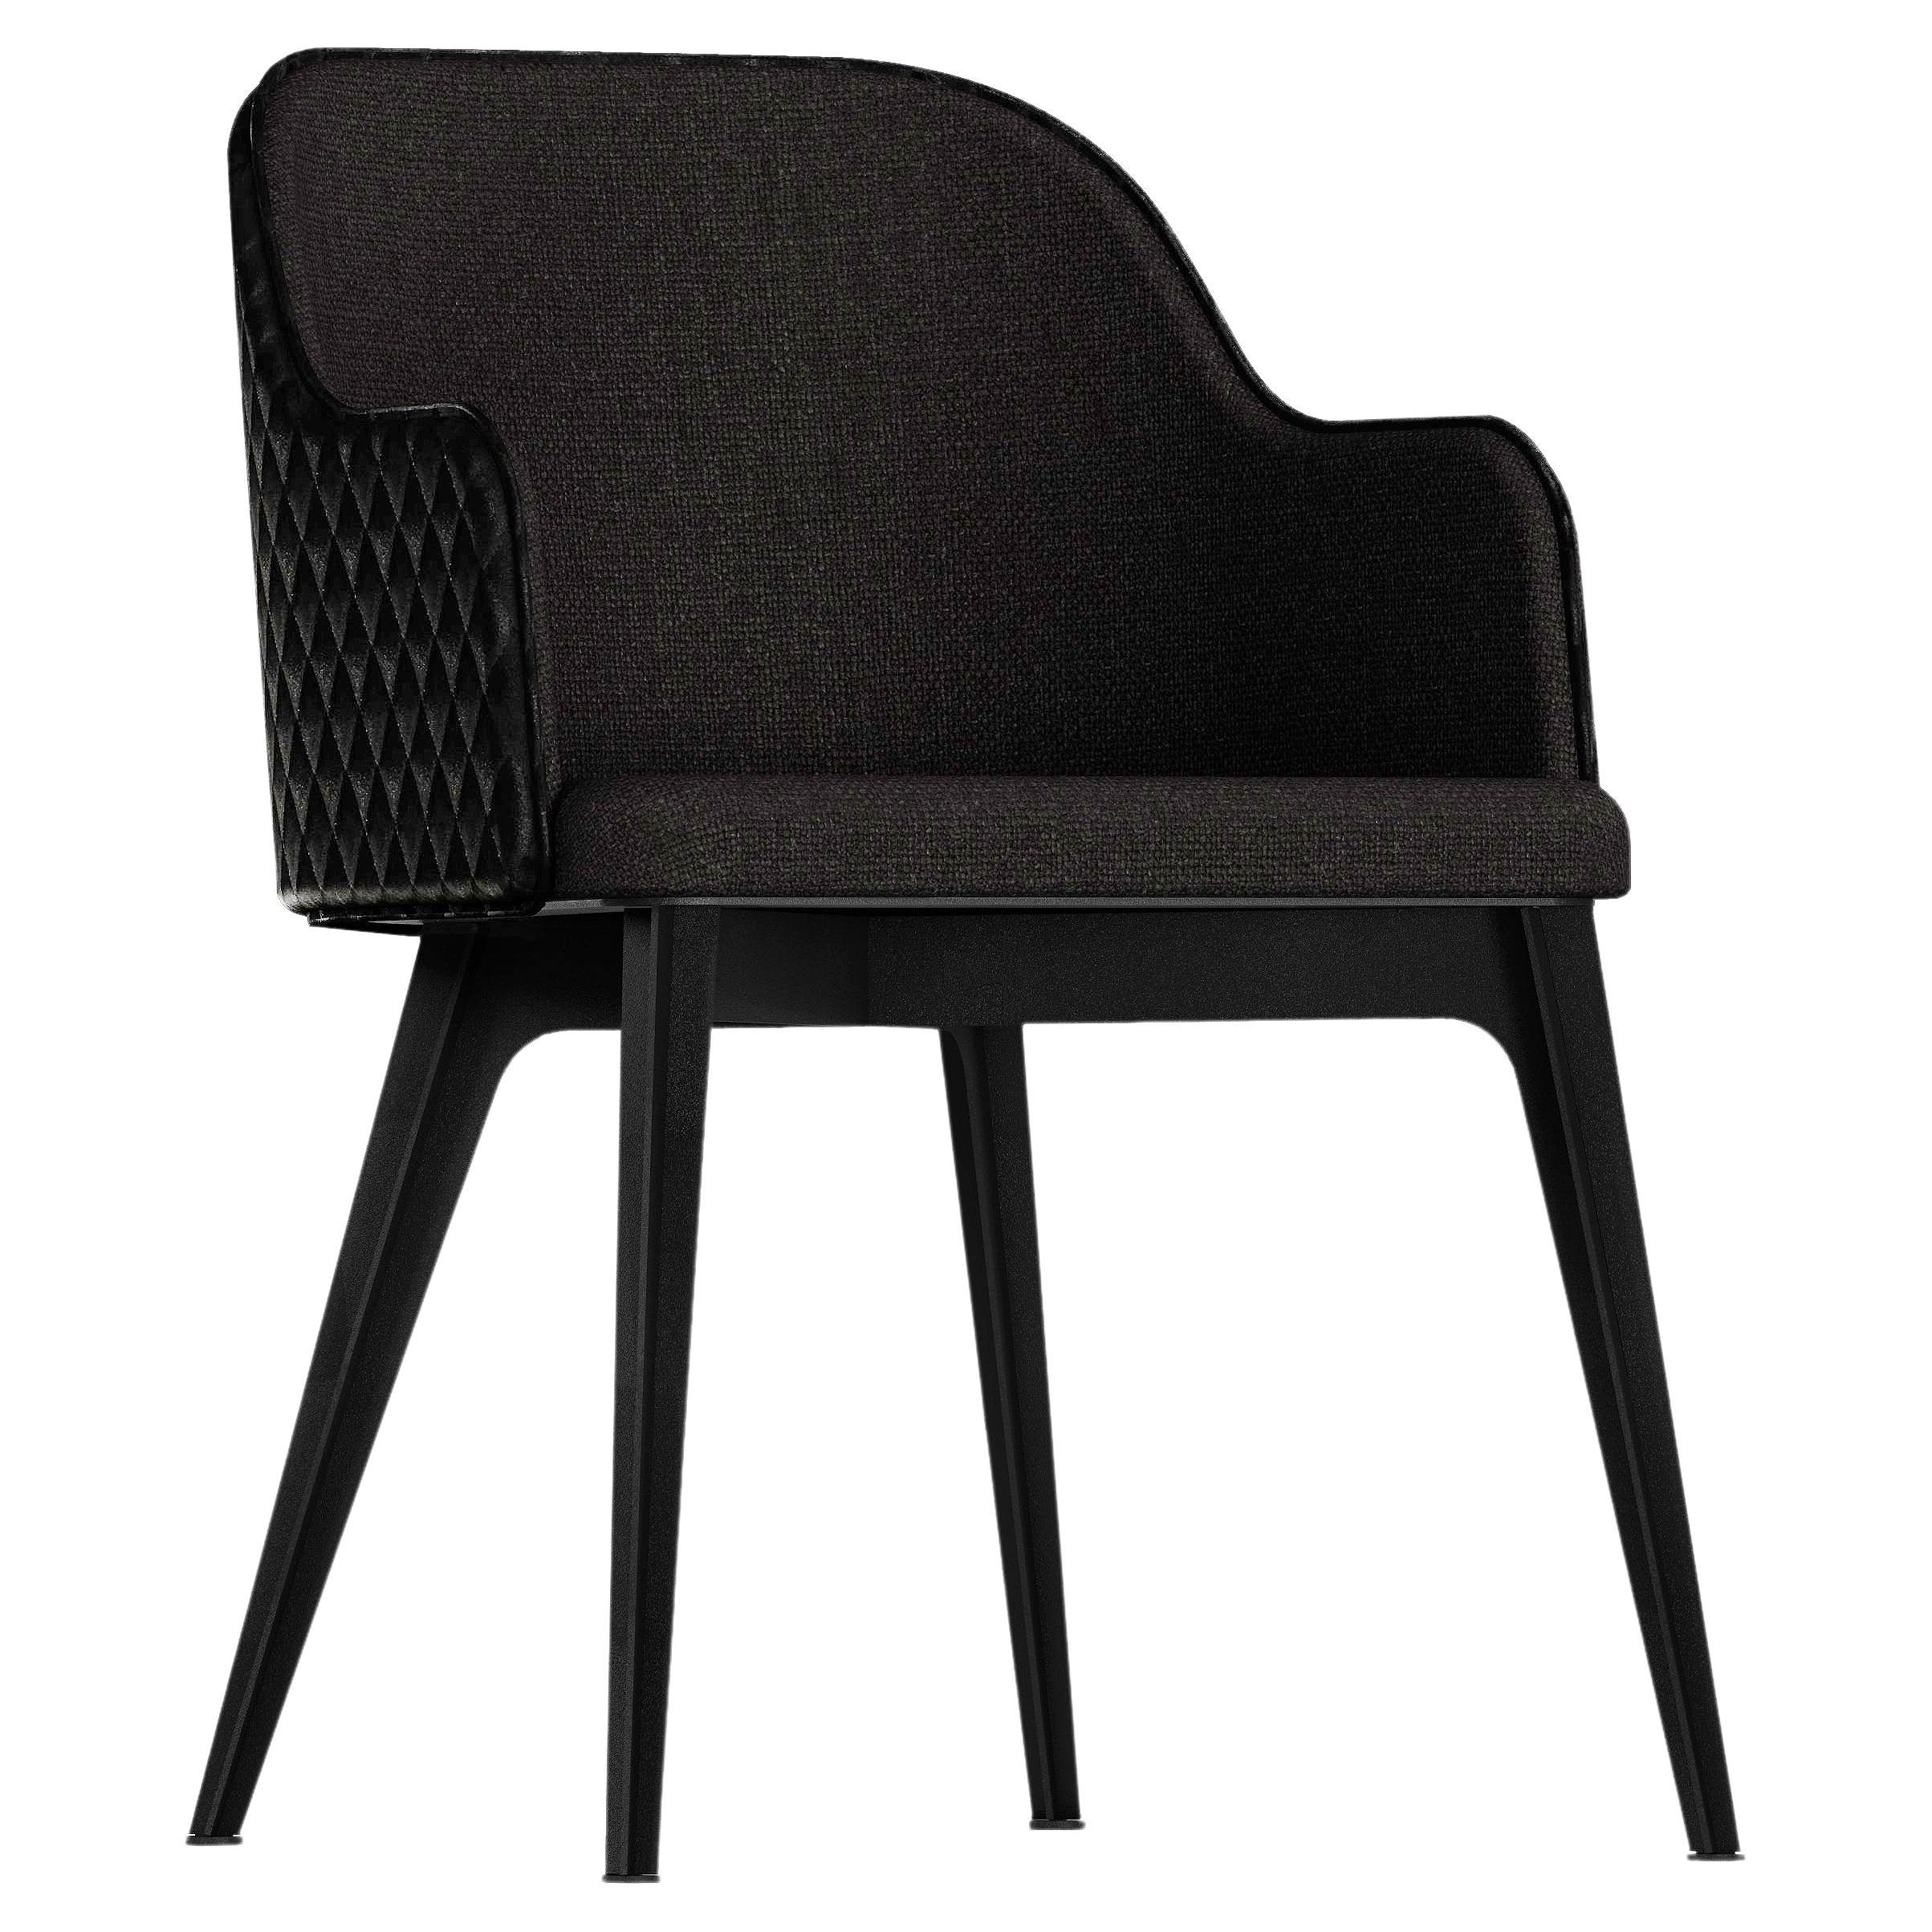 Care upholstered armchair with black steel legs